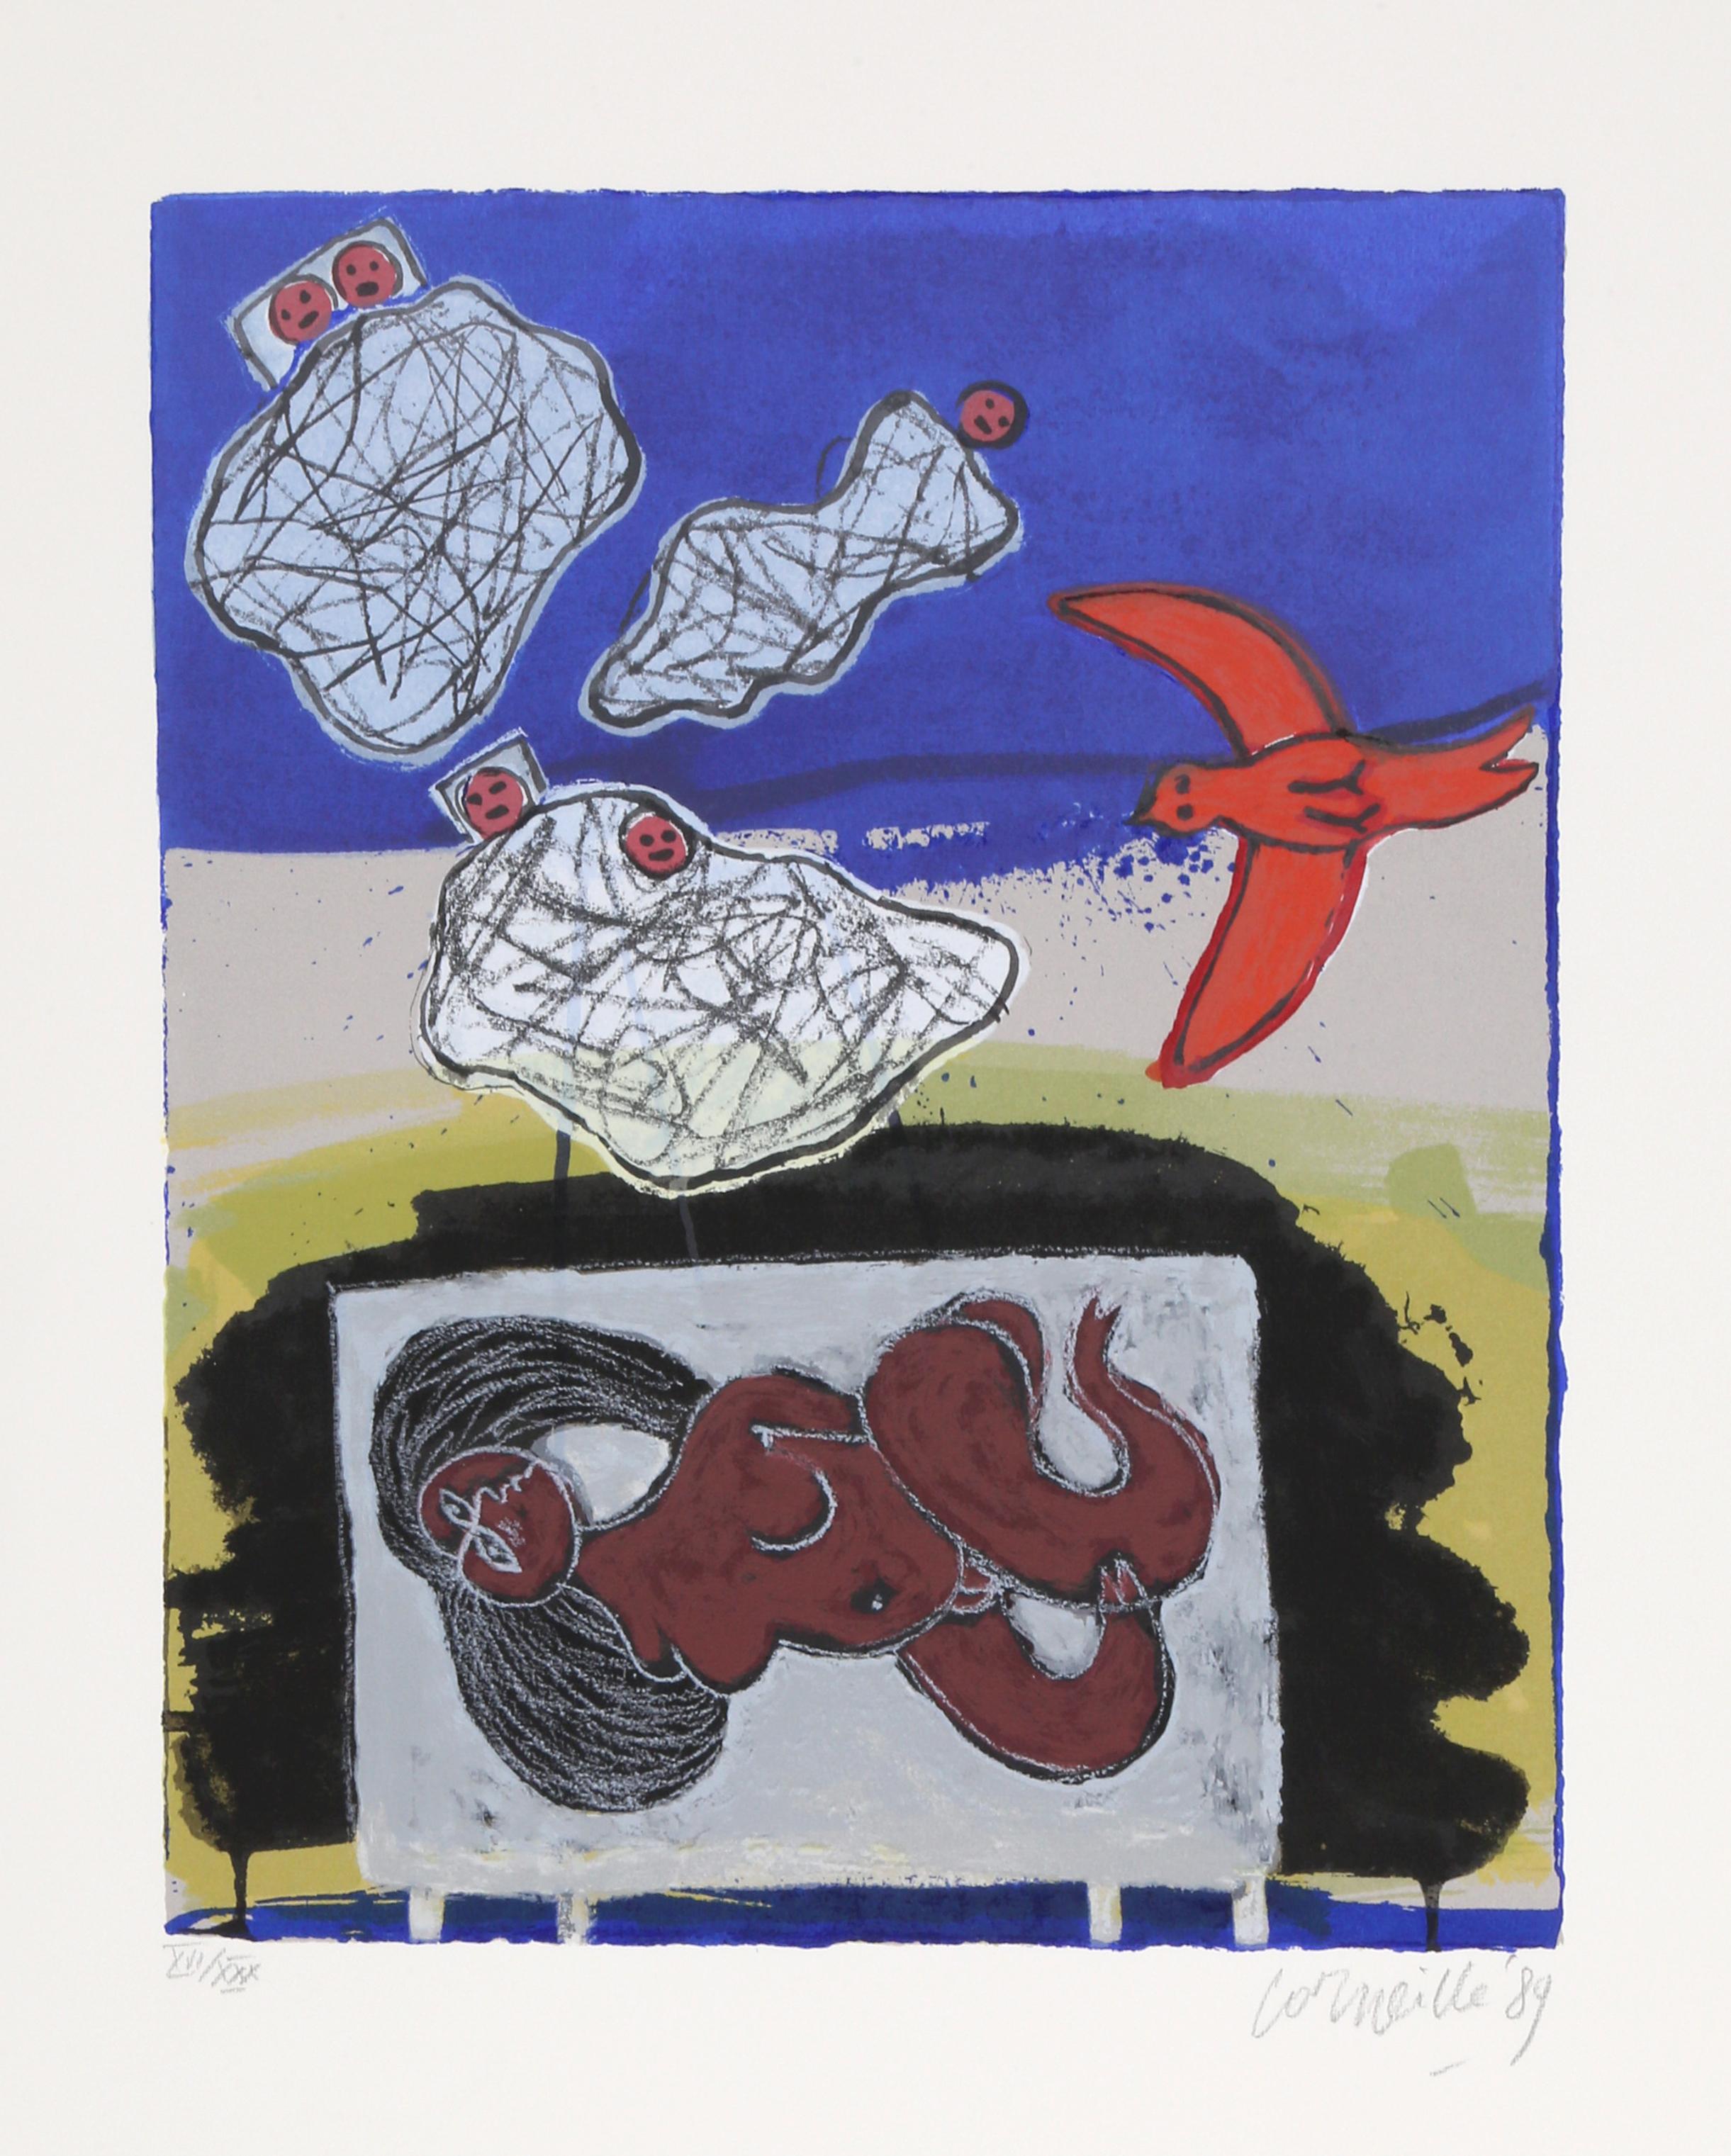 Artist: Corneille, Belgian (1922 - 2010)
Title: Eluard from the Portfolio of Six Reves Peints
Year: 1989
Medium: Lithograph, signed and numbered in pencil 
Edition: XVI/XXX
Image Size: 17 x 14 inches
Size: 30 x 22 inches (76 x 56 cm)